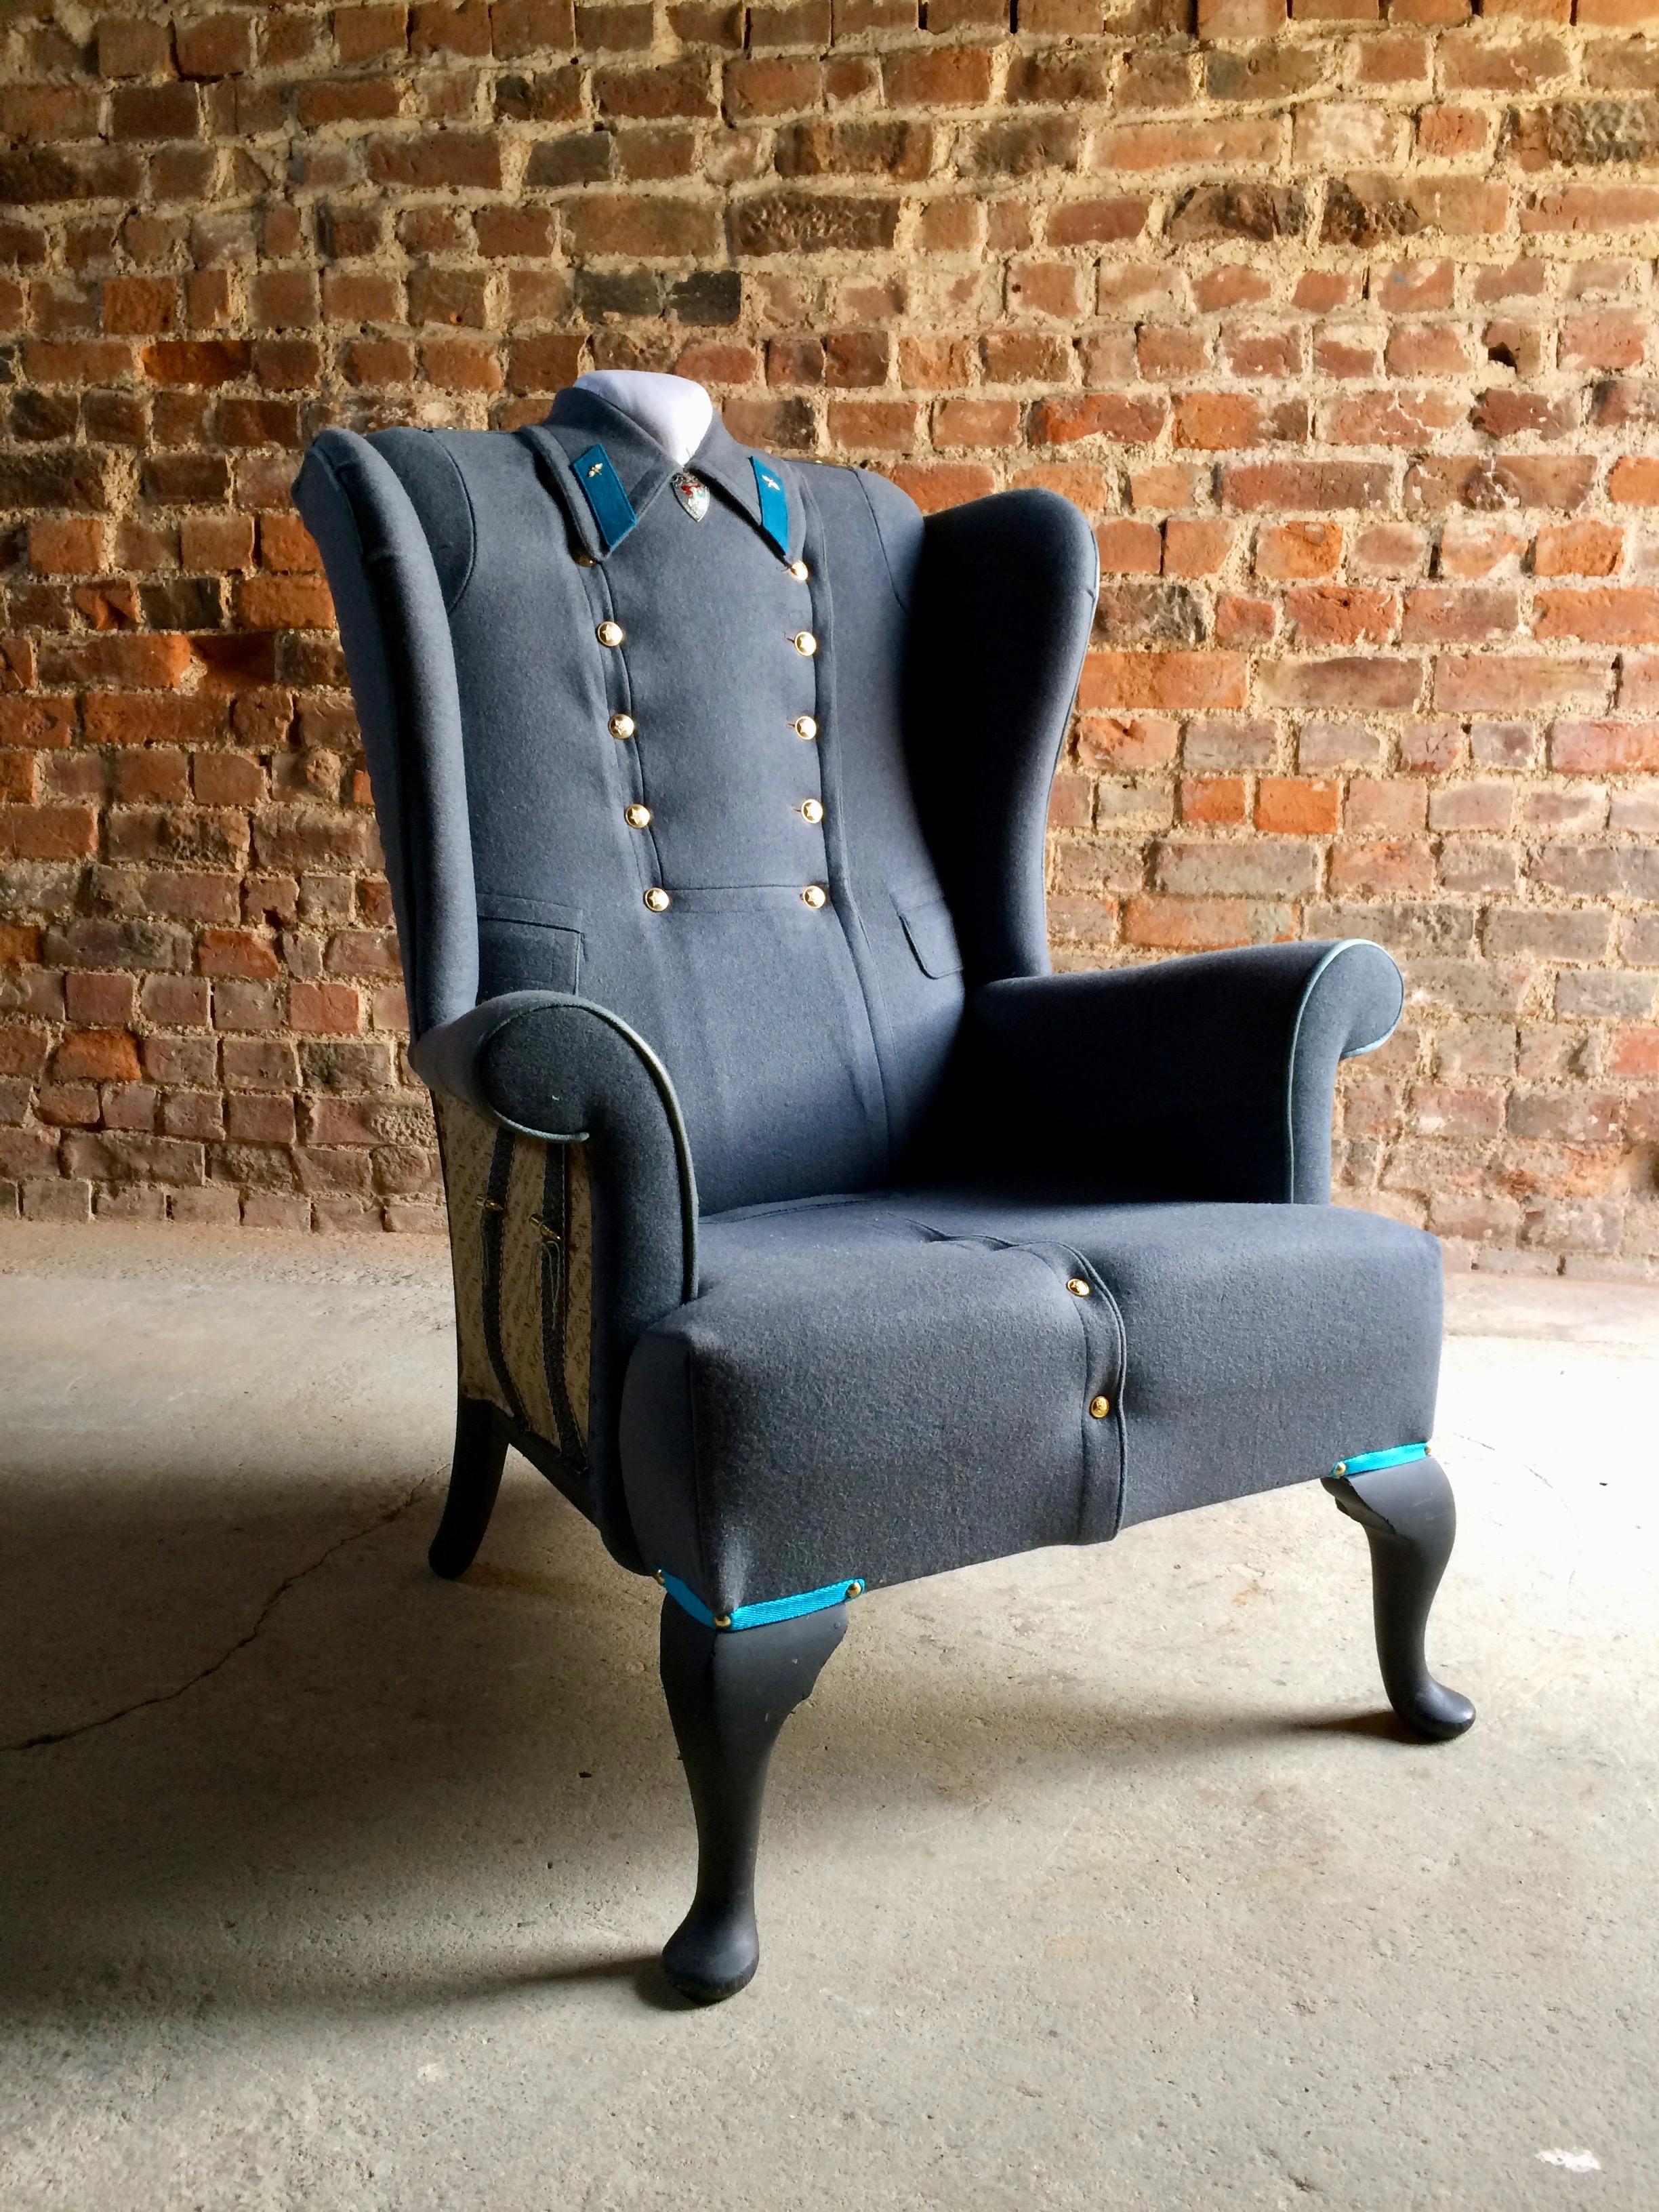 Mid-20th Century Antique Armchair the Khrushchev Wing Commander Lounge Chair Bespoke